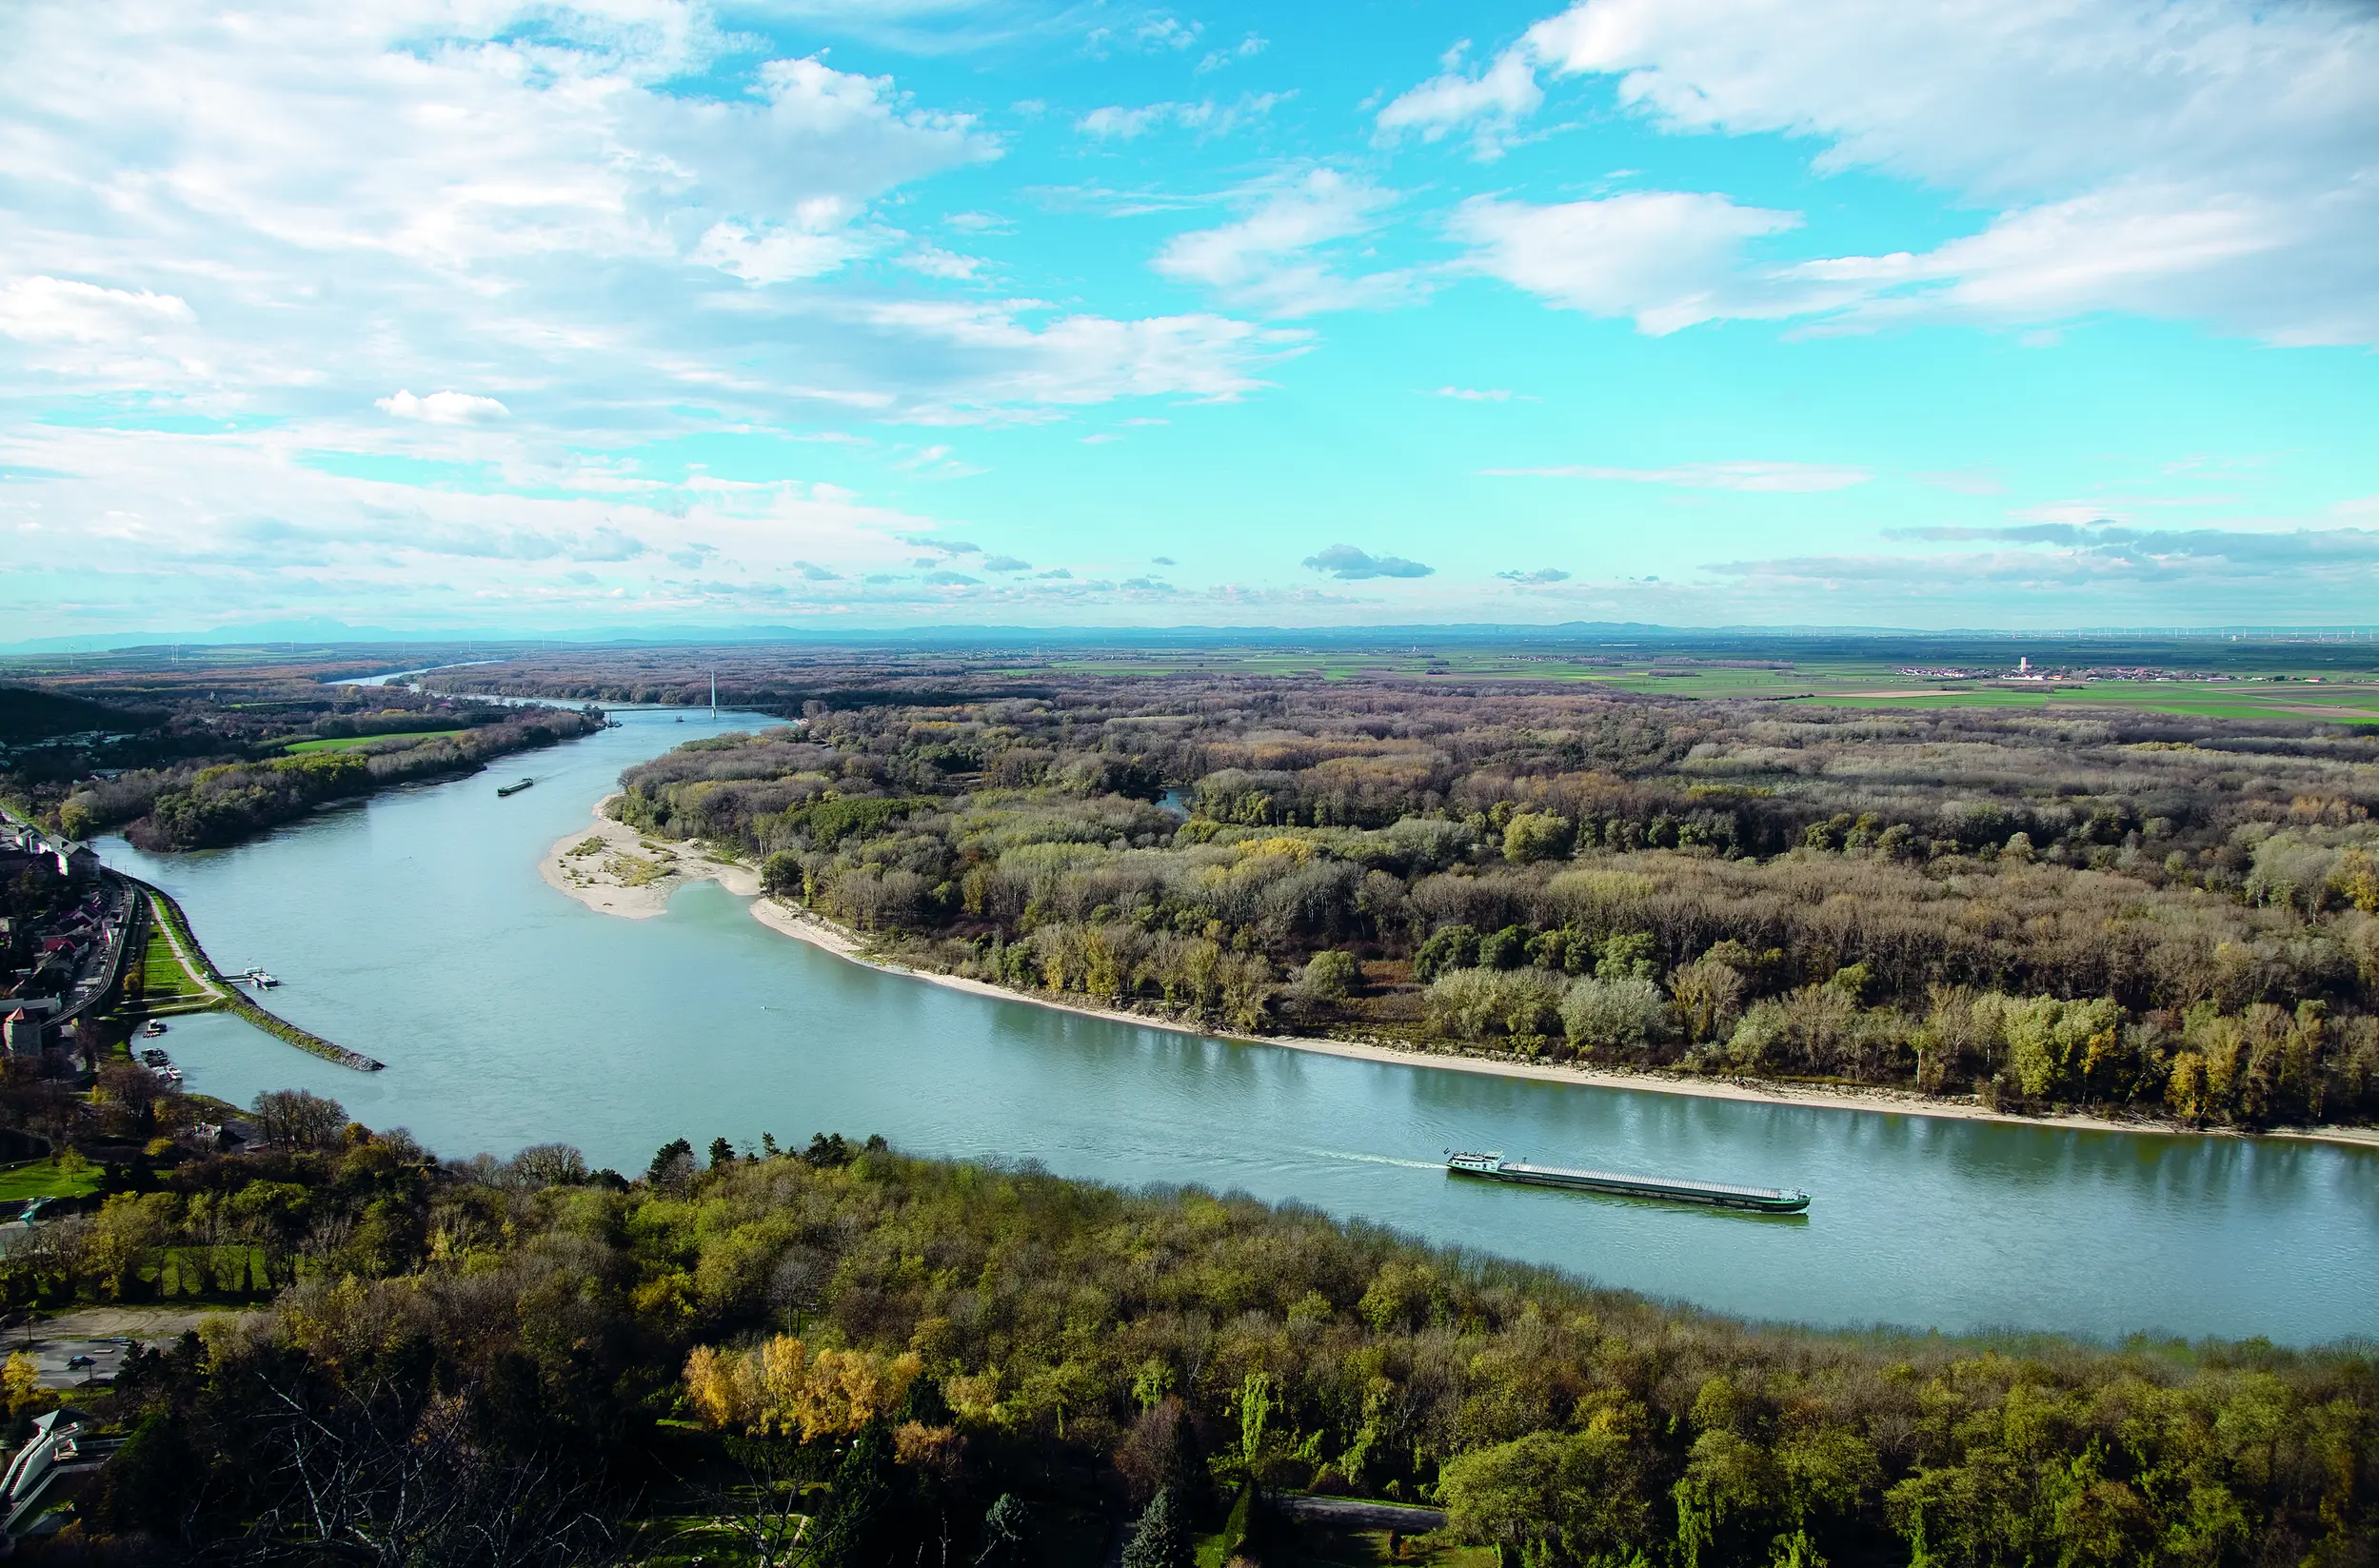 The Danube east of Vienna